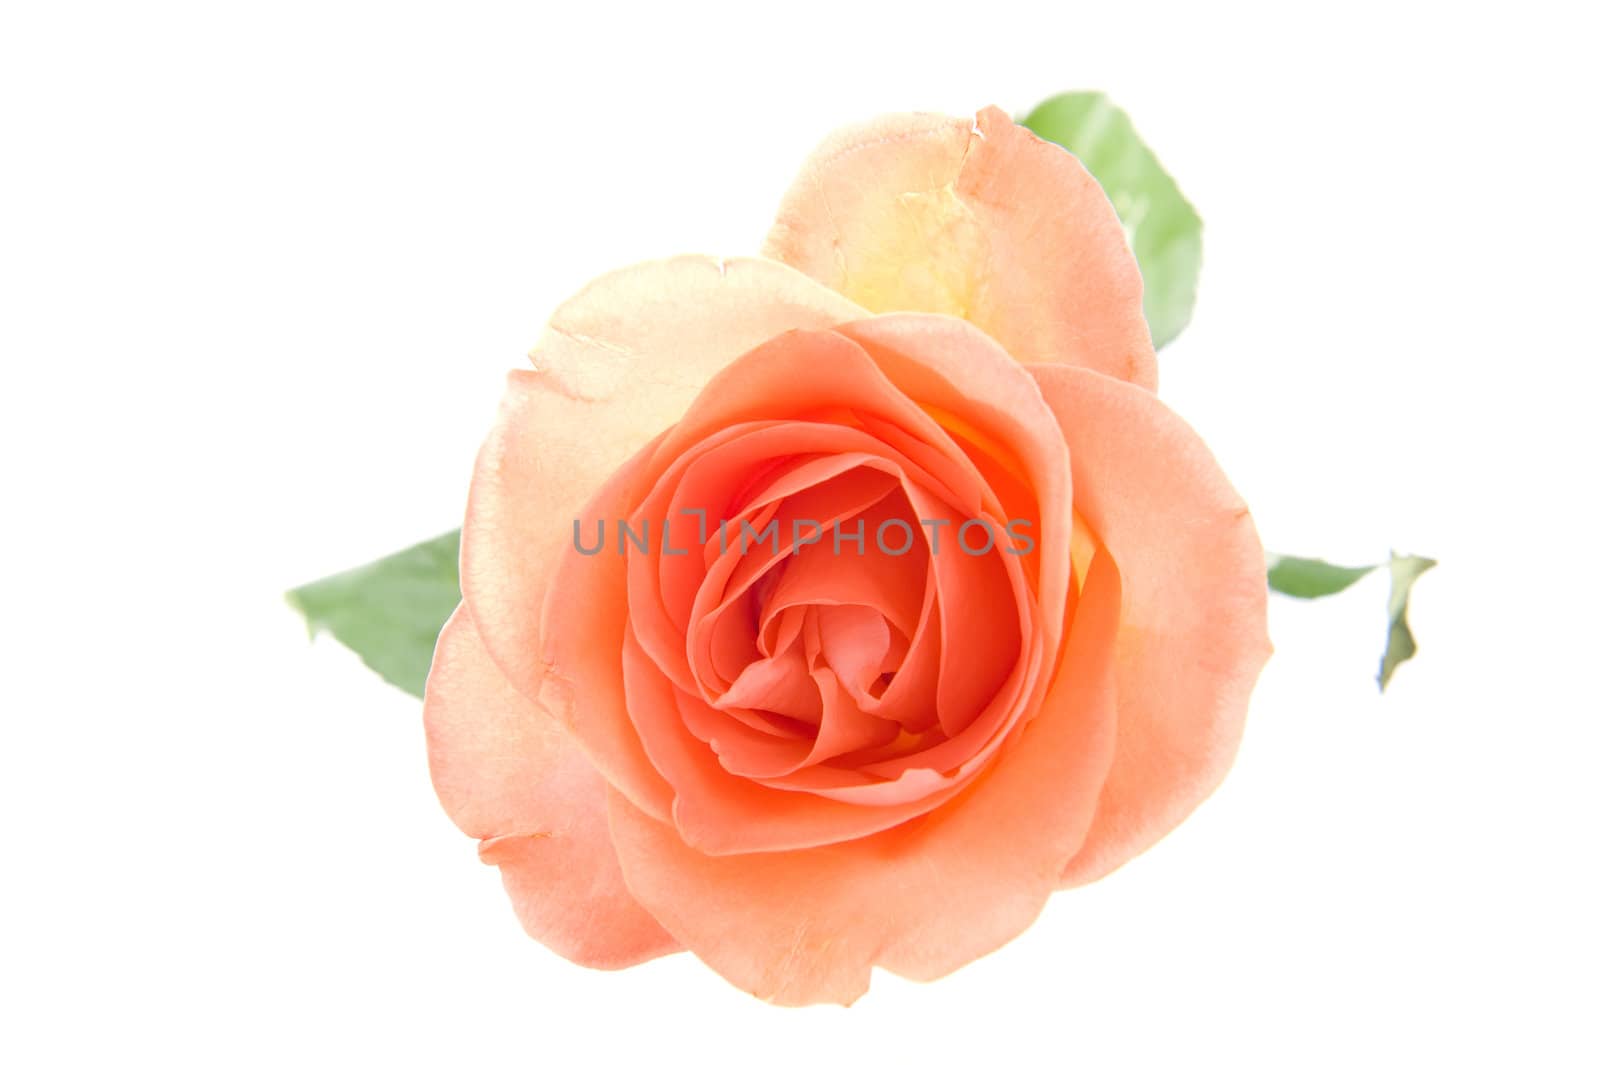 A beautiful rose on a white background